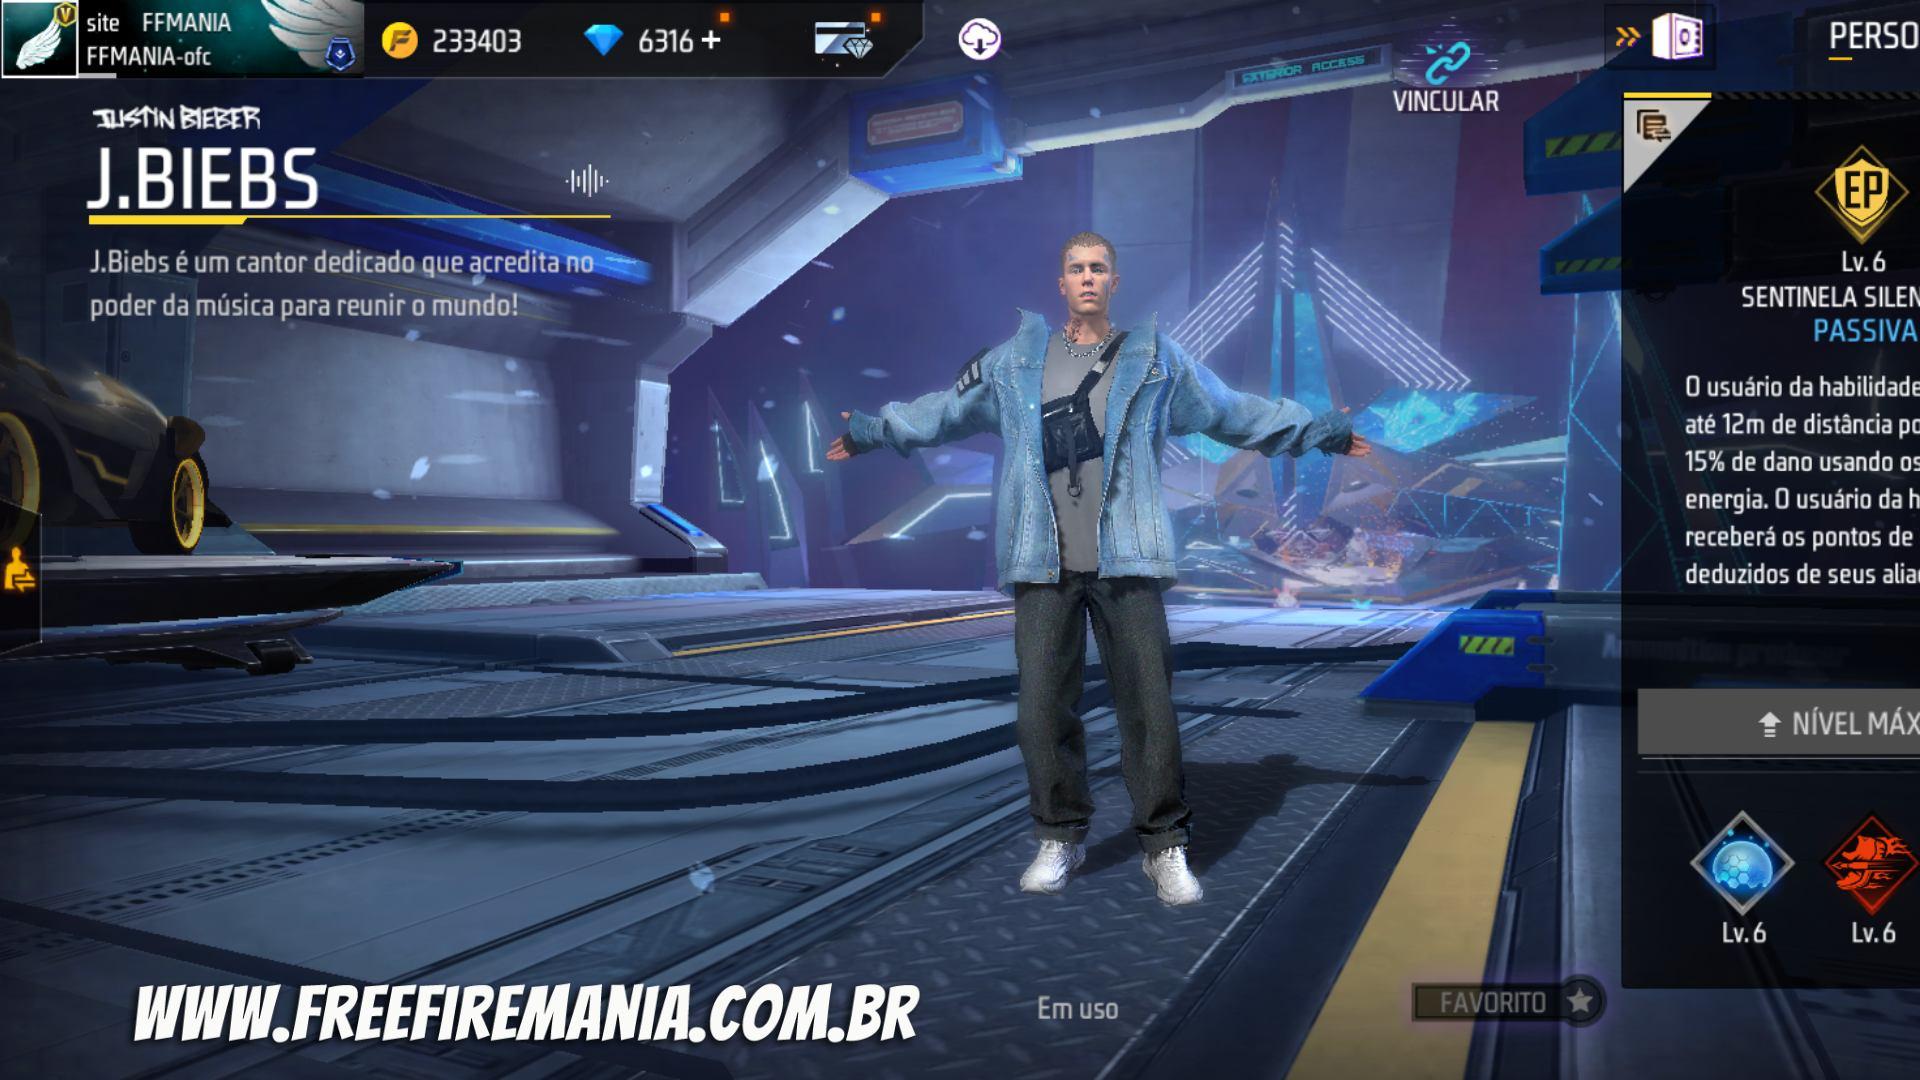 Garena will remove character J.Biebs (Justin Bieber) from Free Fire